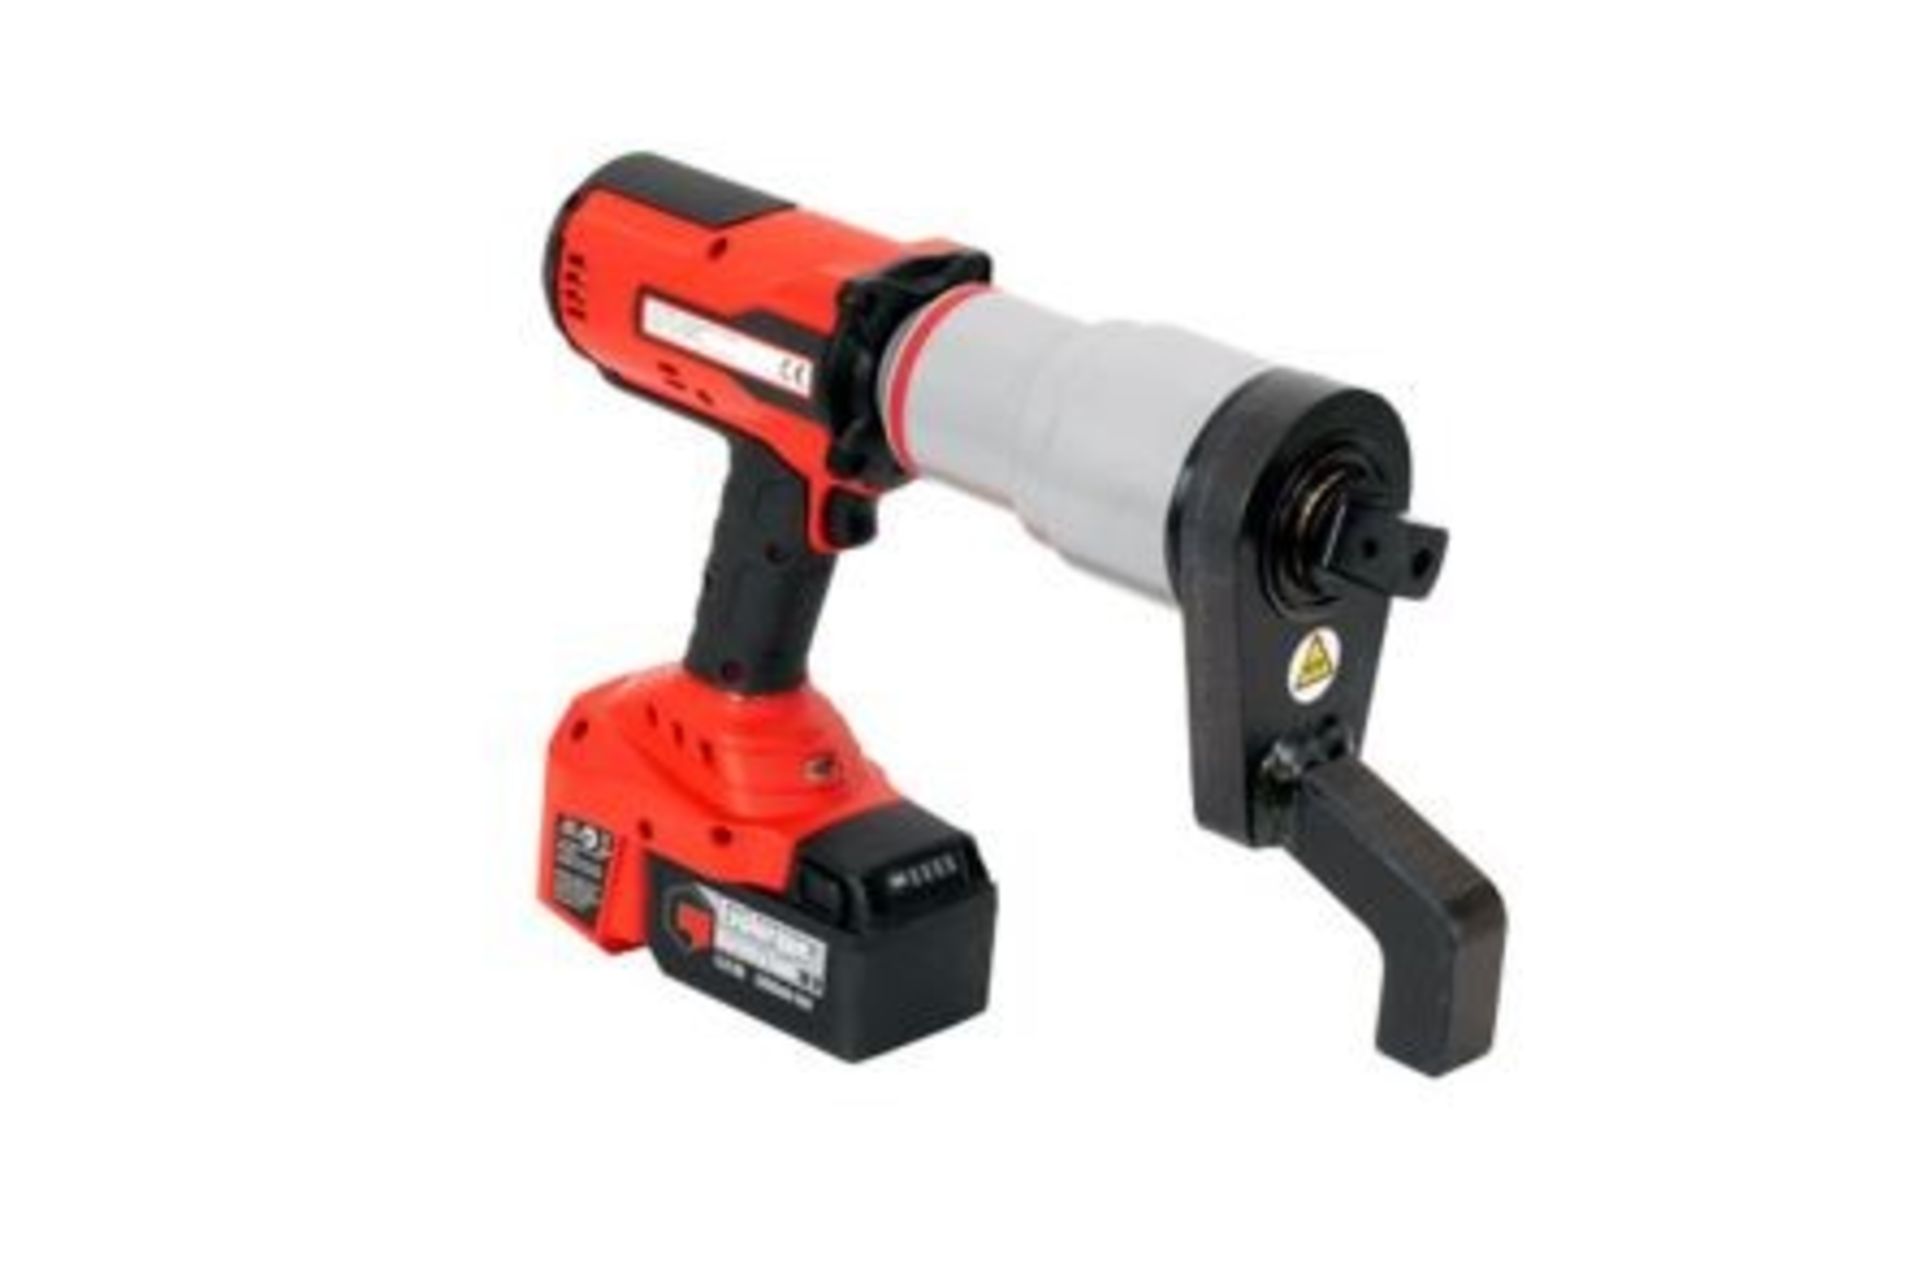 Norbar Torque Tools EBT-72-4000 Cordless Torque Wrench, 800Nm- 4000Nm, 1 in Drive, 1 Type G - Britis - Image 2 of 2